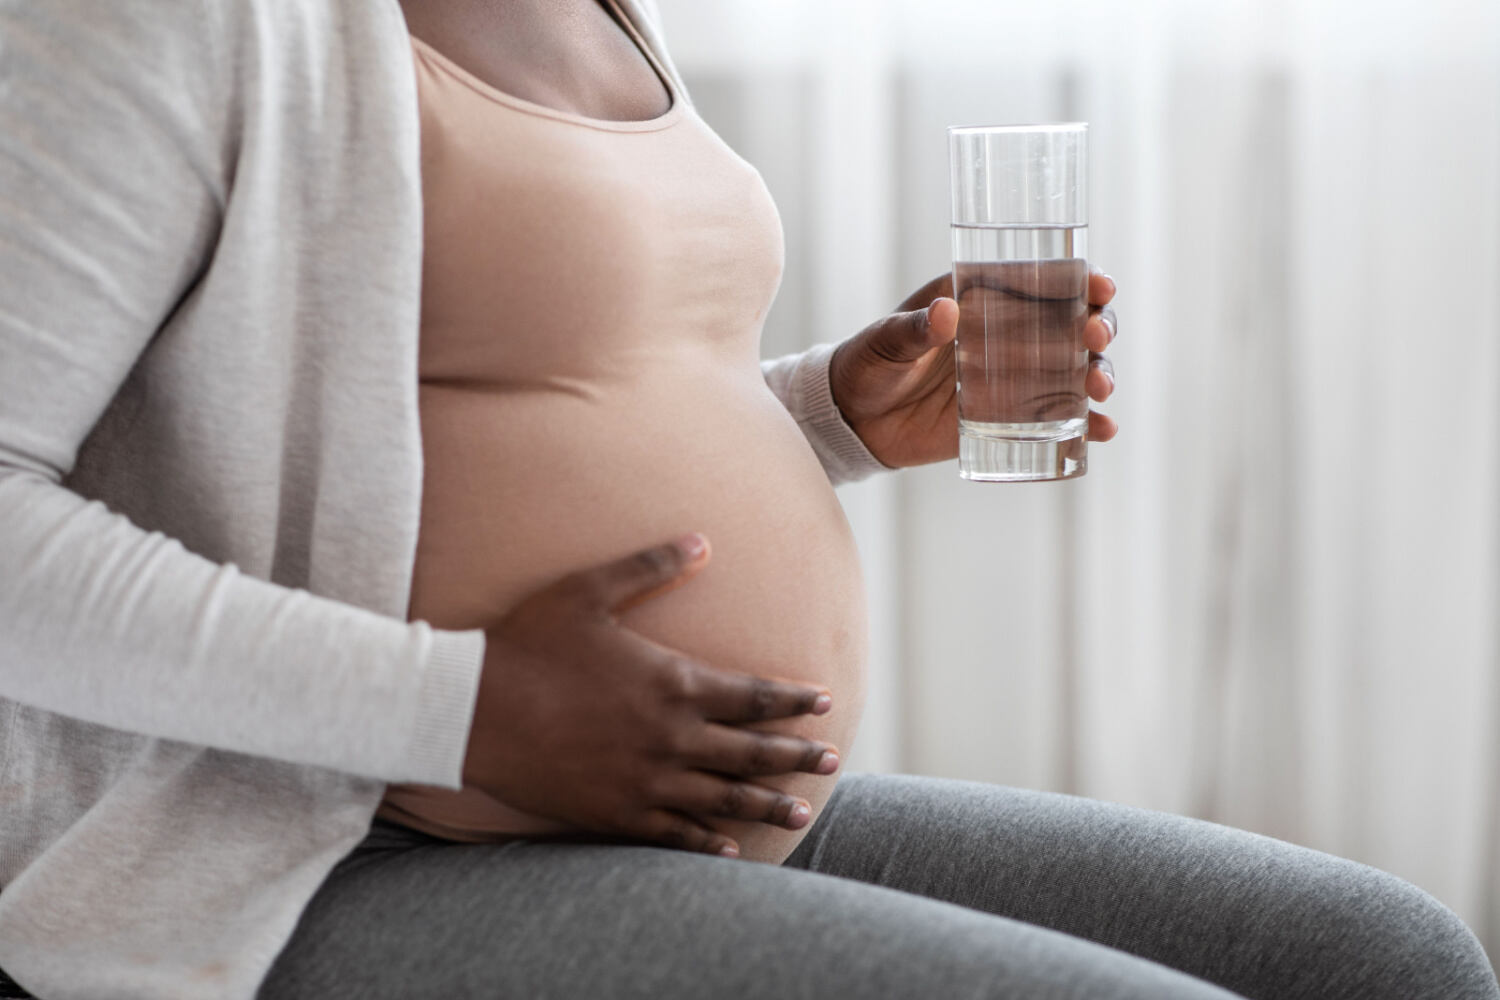 What Are The Causes Of High Protein In Urine During Pregnancy?